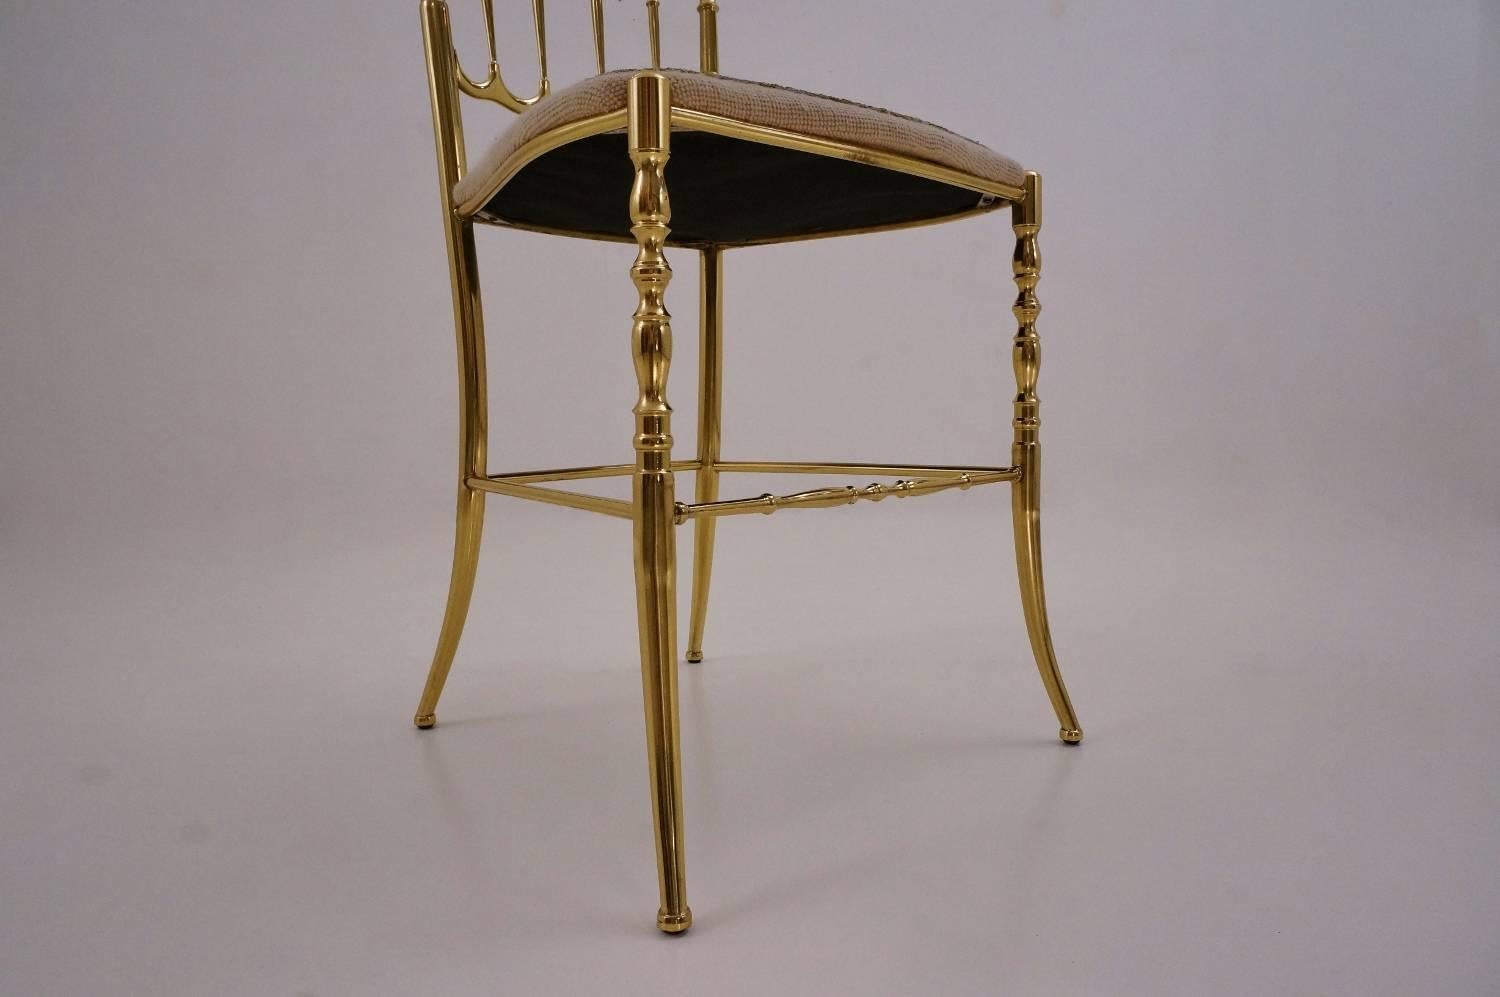 Chiavari Solid Brass Chair, Needle Point Seat and High Back, circa 1950s Italian 3